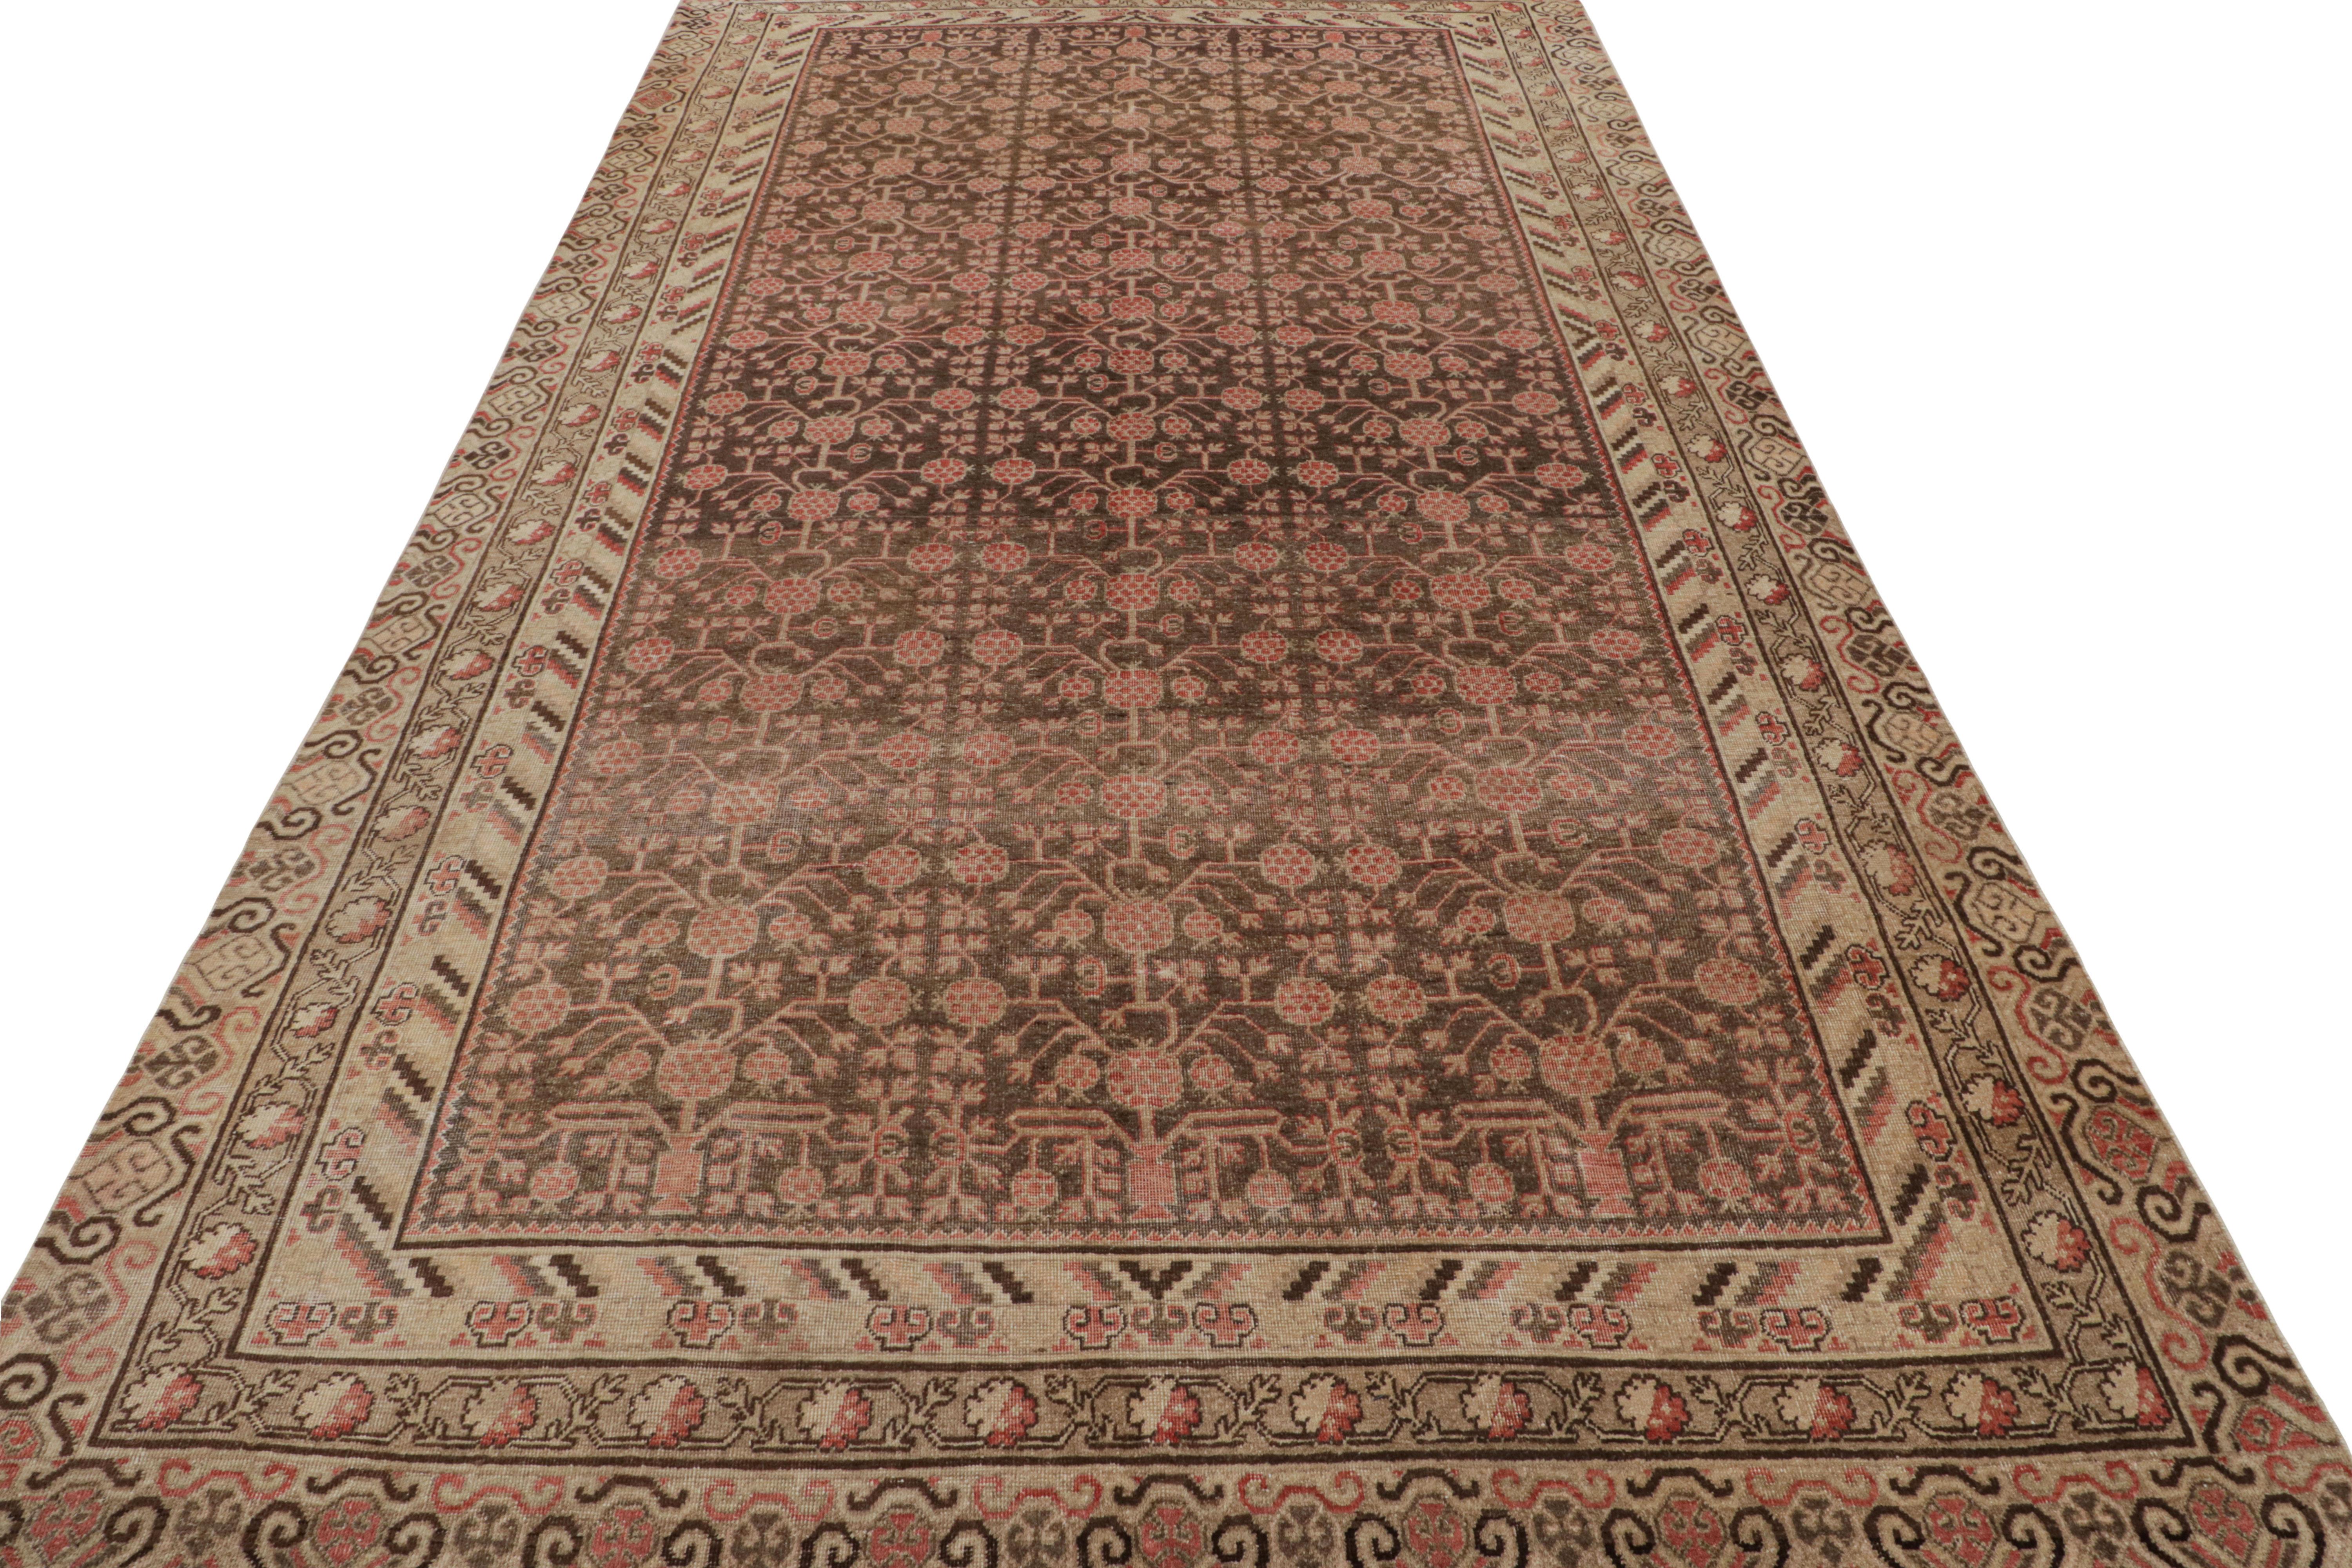 Antique Khotan Rug Beige Brown and Red Pomegranate Pattern by Rug & Kilim In Good Condition For Sale In Long Island City, NY